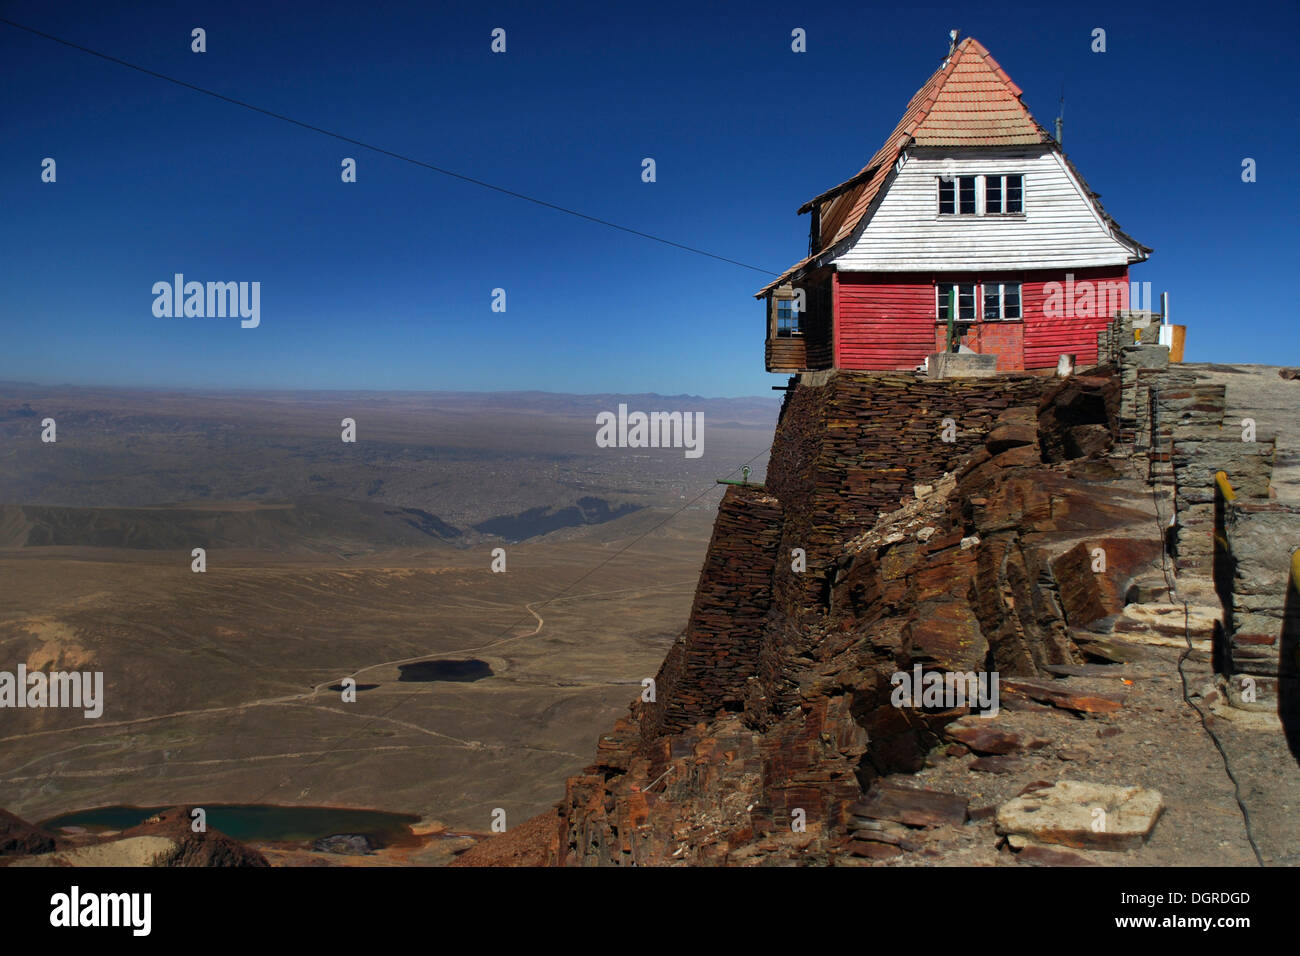 Mountain shelter at 5300m altitude, Andes mountain range, Chacaltaya, La Paz, Bolivia, South America Stock Photo